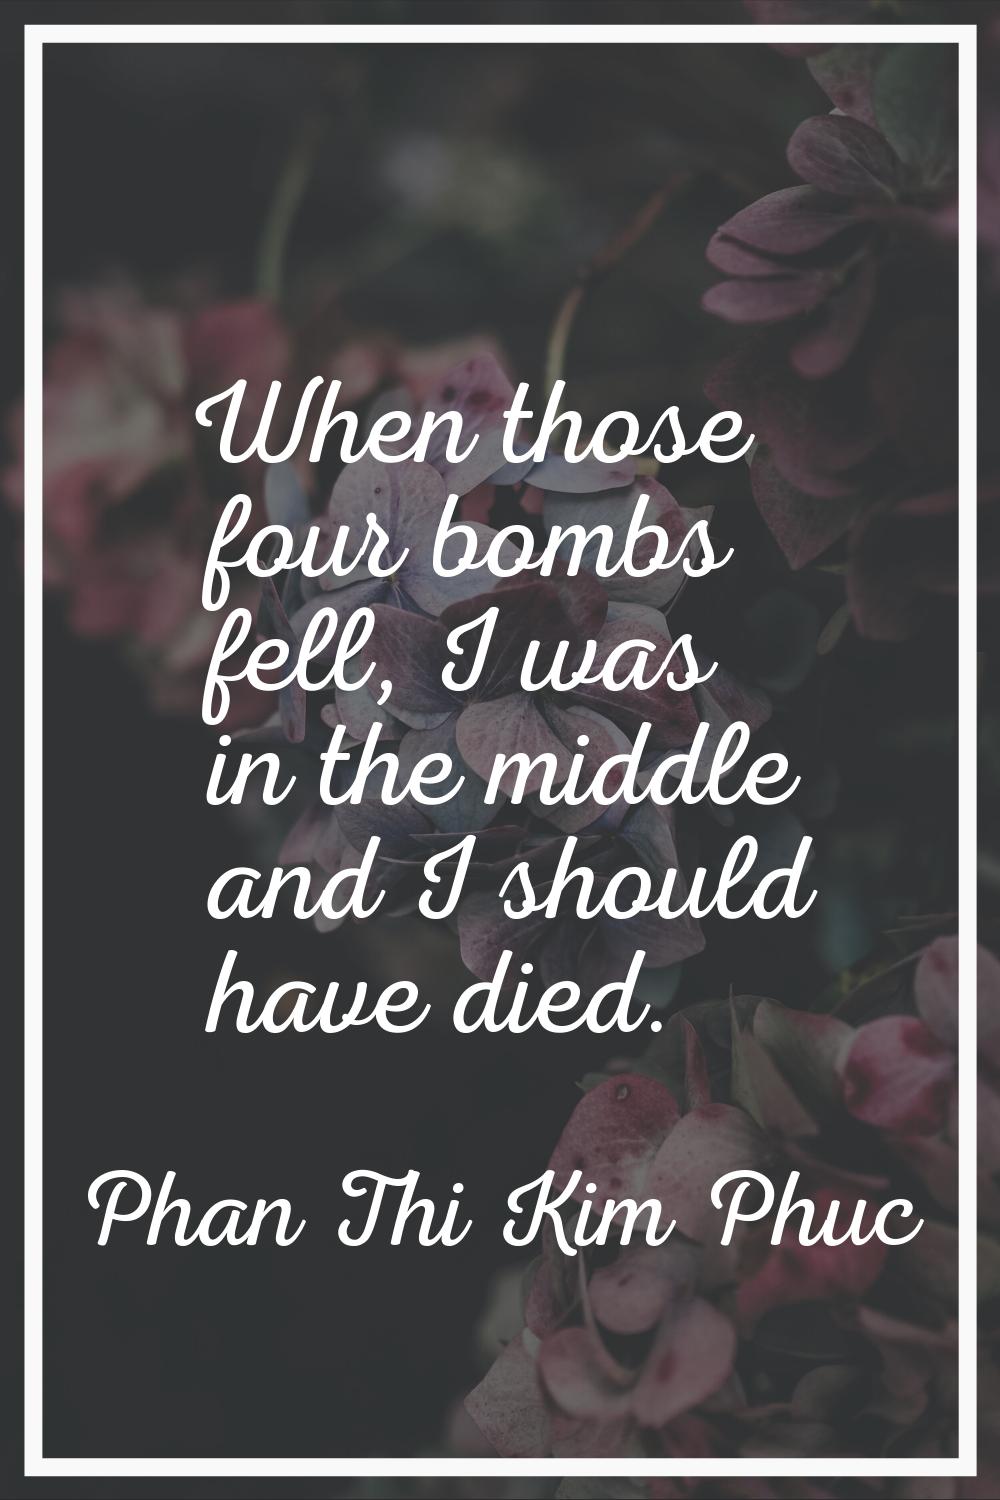 When those four bombs fell, I was in the middle and I should have died.